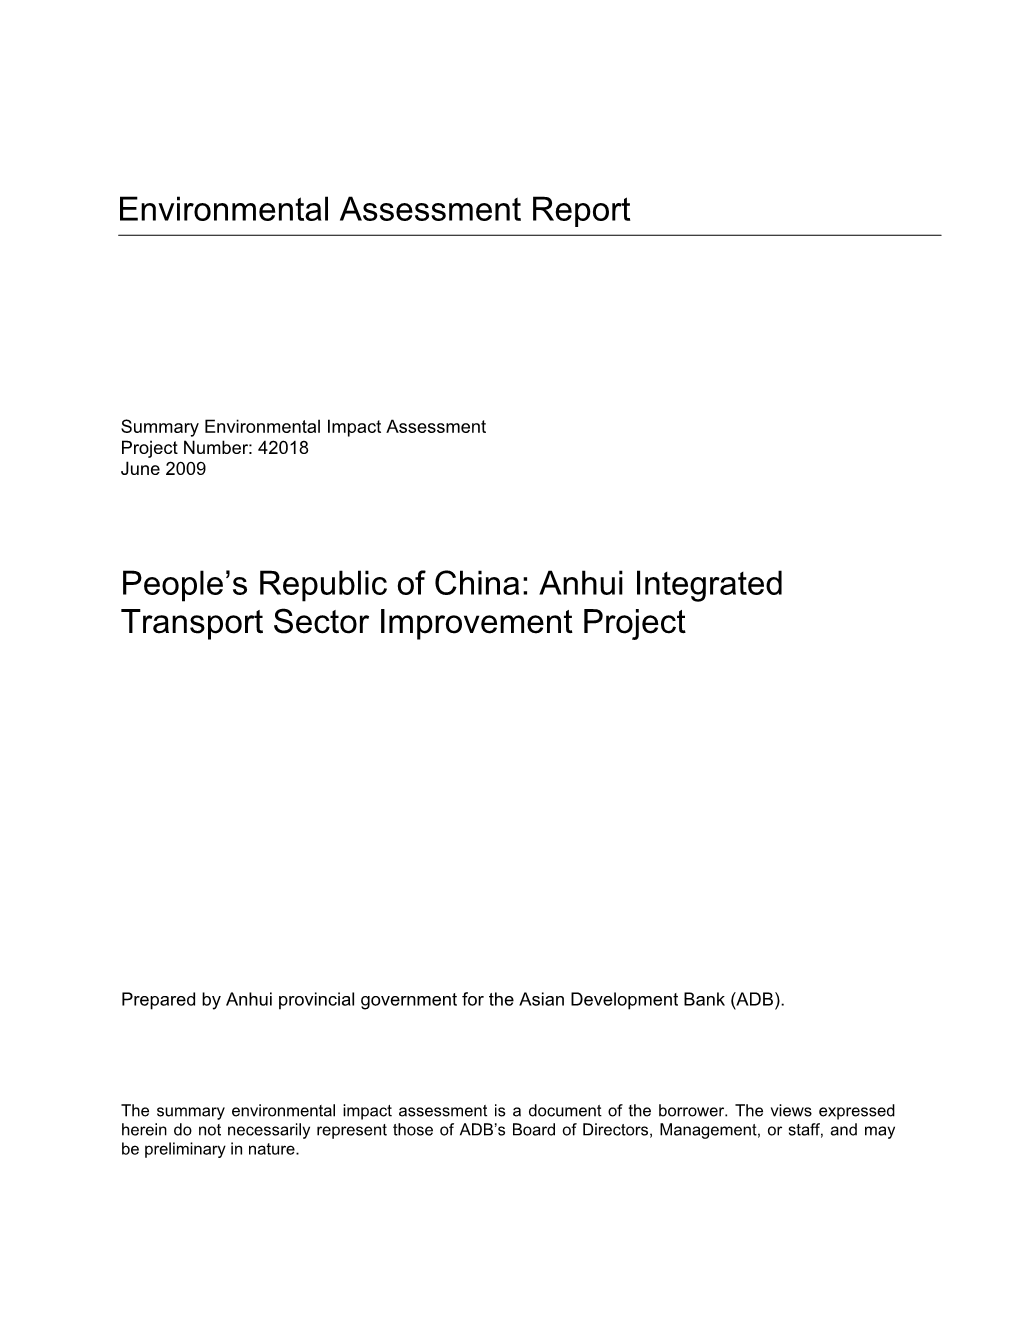 Anhui Integrated Transport Sector Improvement Project